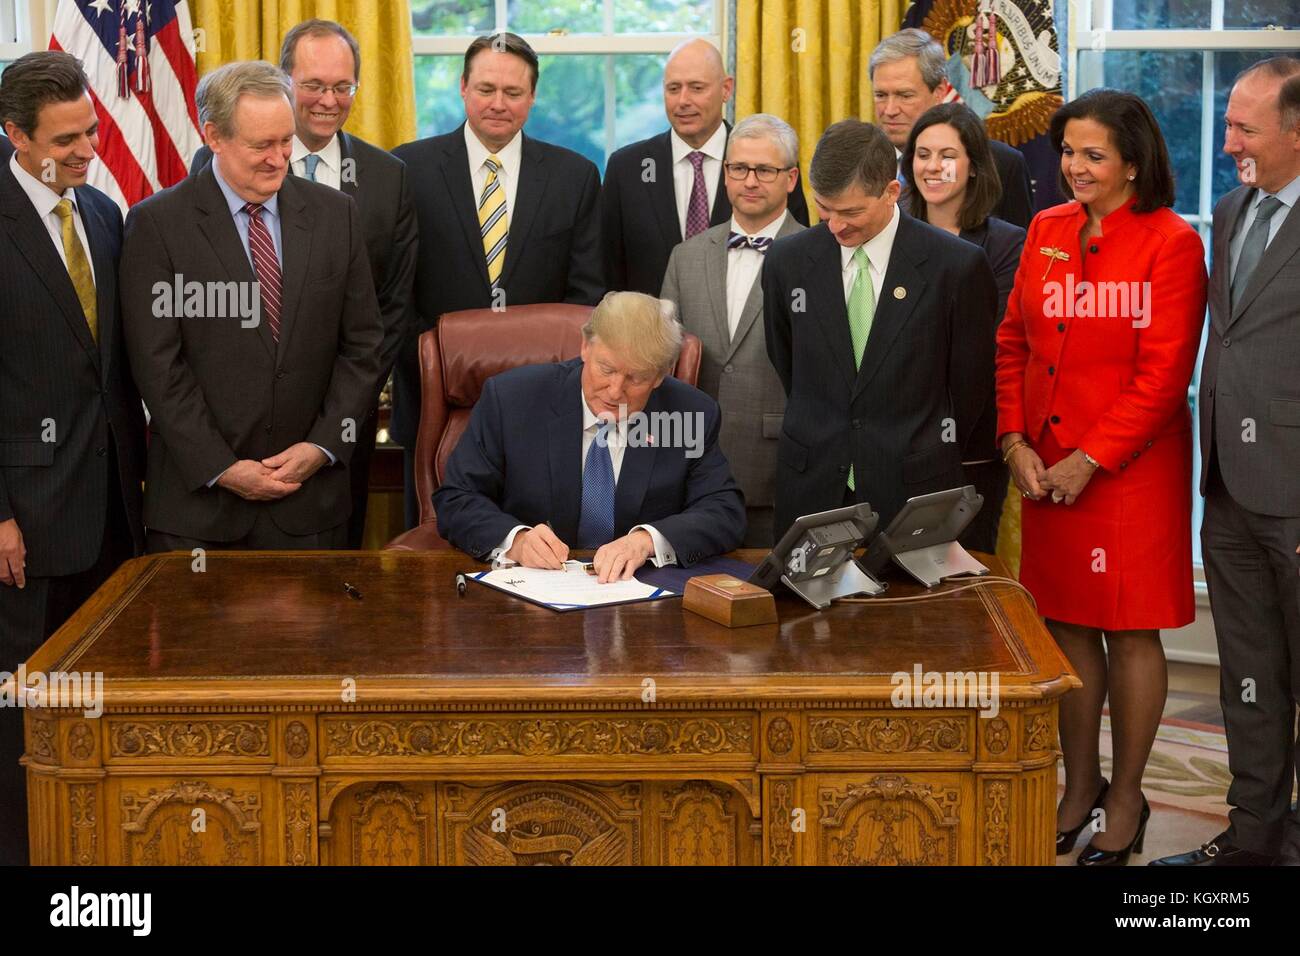 U.S. President Donald Trump signs H.J. Res.111 - the Disapproving of the Consumer Financial Protection Bureaus Arbitration Agreement Rule into a law in the White House Oval Office November 1, 2017 in Washington, DC.  (photo by Joyce N. Boghosian via Planetpix) Stock Photo